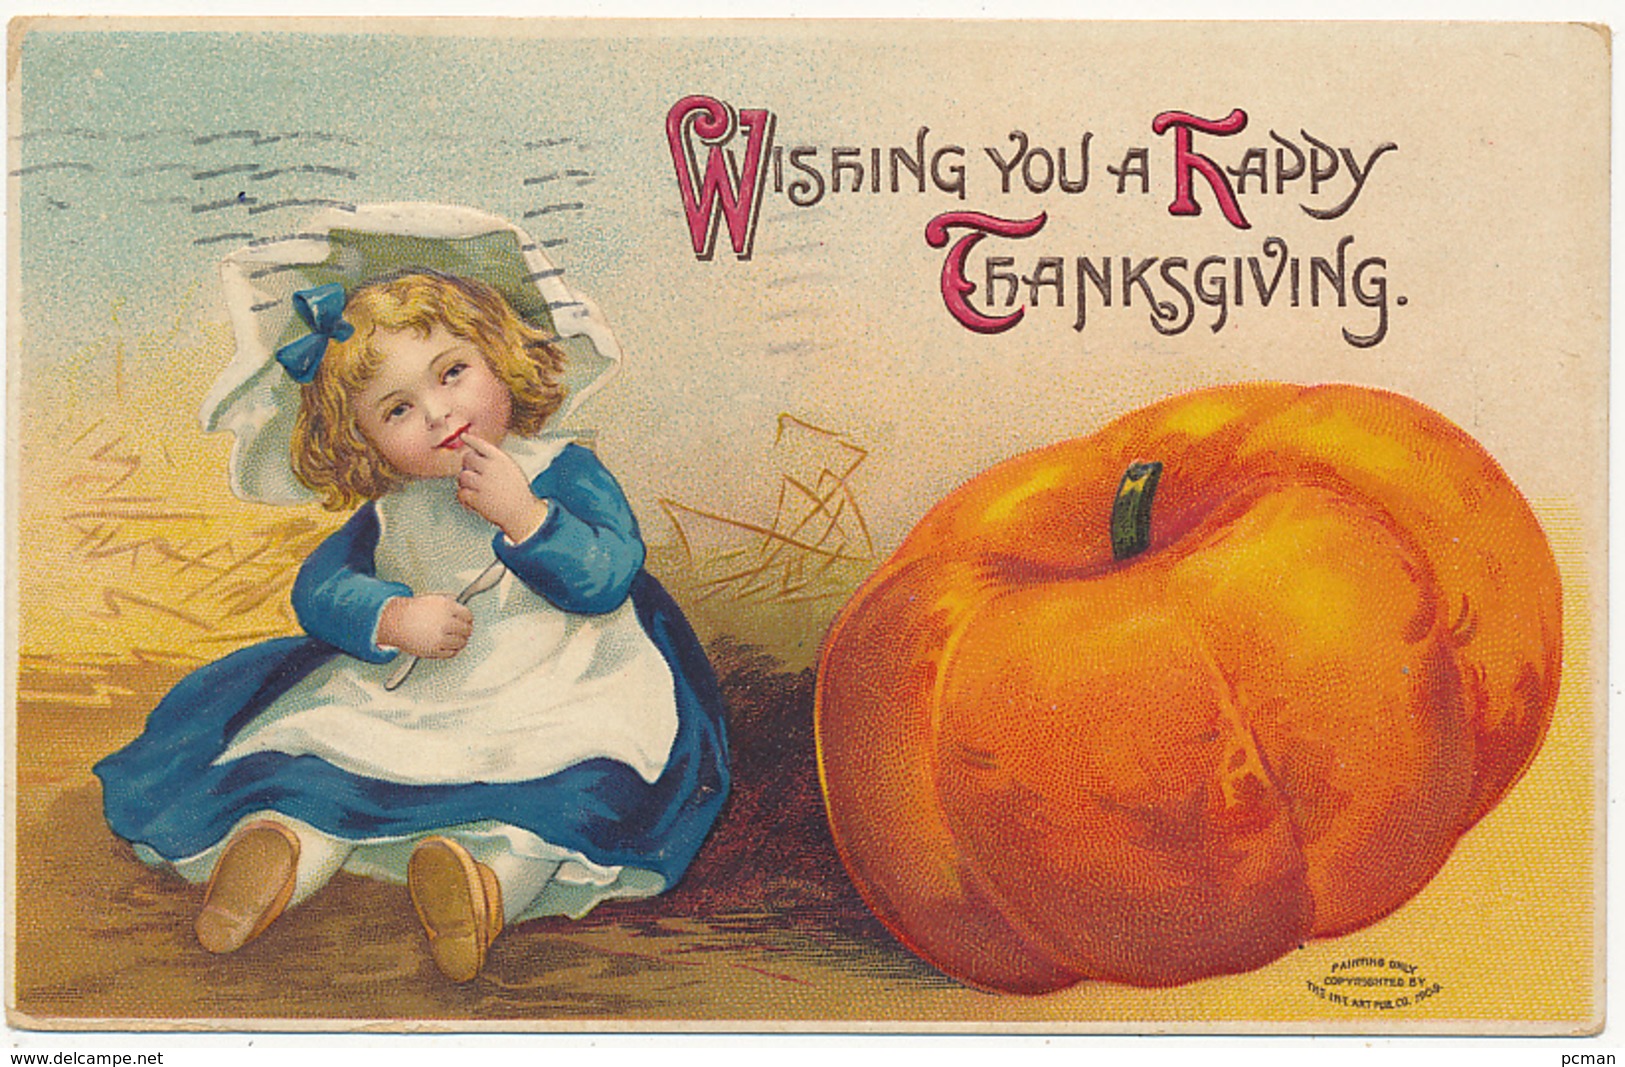 WISHING YOU A HAPPY THANKSGIVING - Large Pumpkin - Pretty Little Girl - By International Art Publ, Co., No 51784, Mailed - Thanksgiving